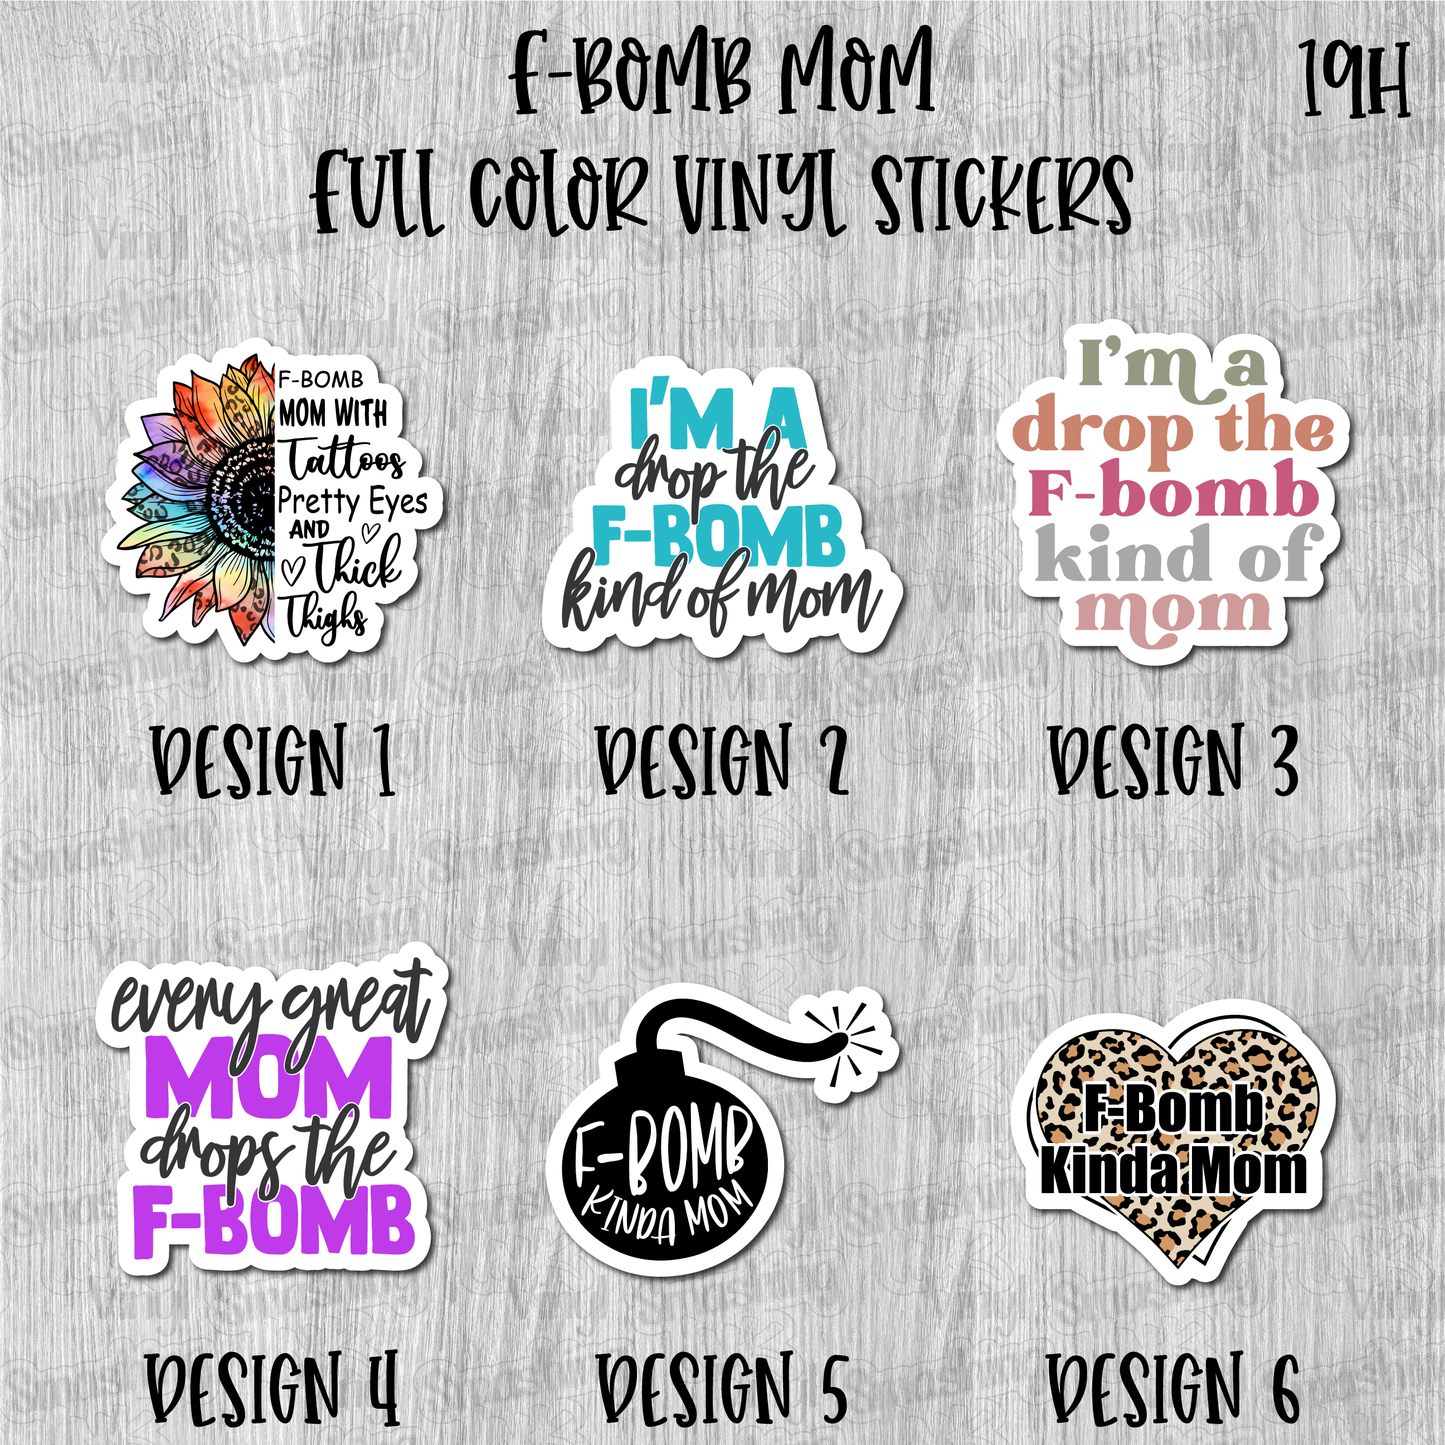 F-Bomb Mom - Full Color Vinyl Stickers (SHIPS IN 3-7 BUS DAYS)